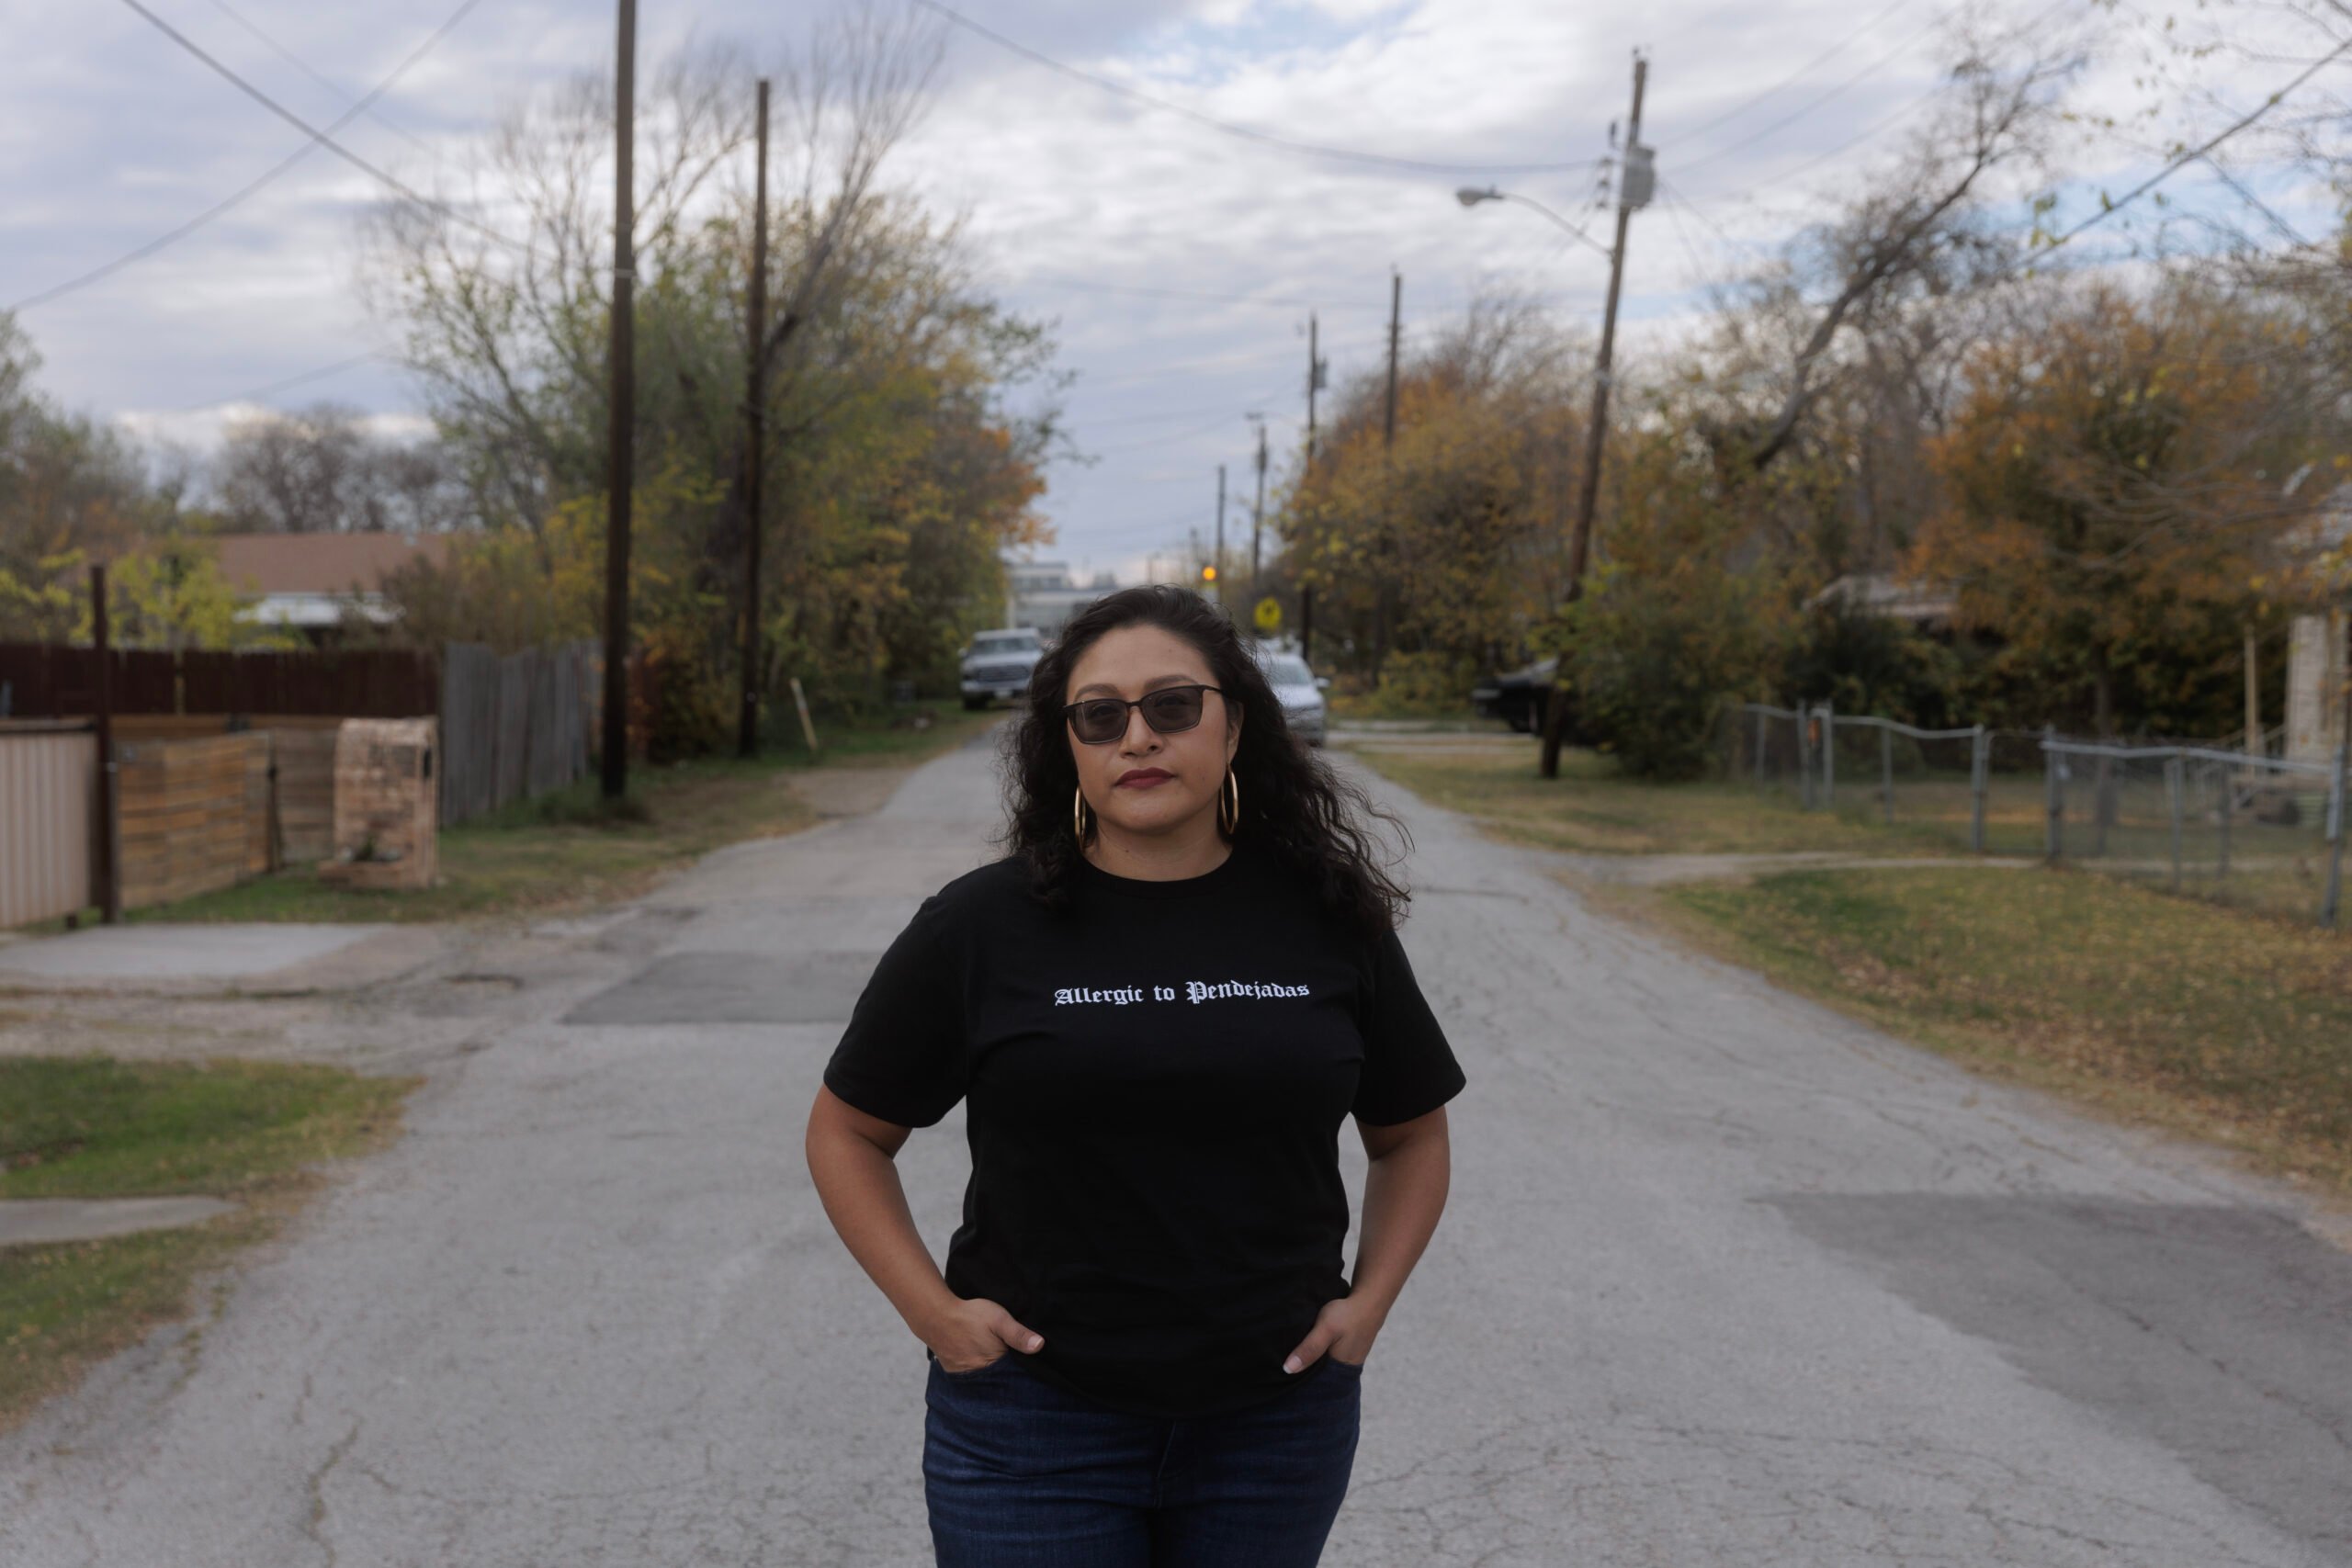 A latinx woman in a black t-shirt reading "Allergic to Pendebrajas" stands in her suburban neighborhjood in West Dallas.